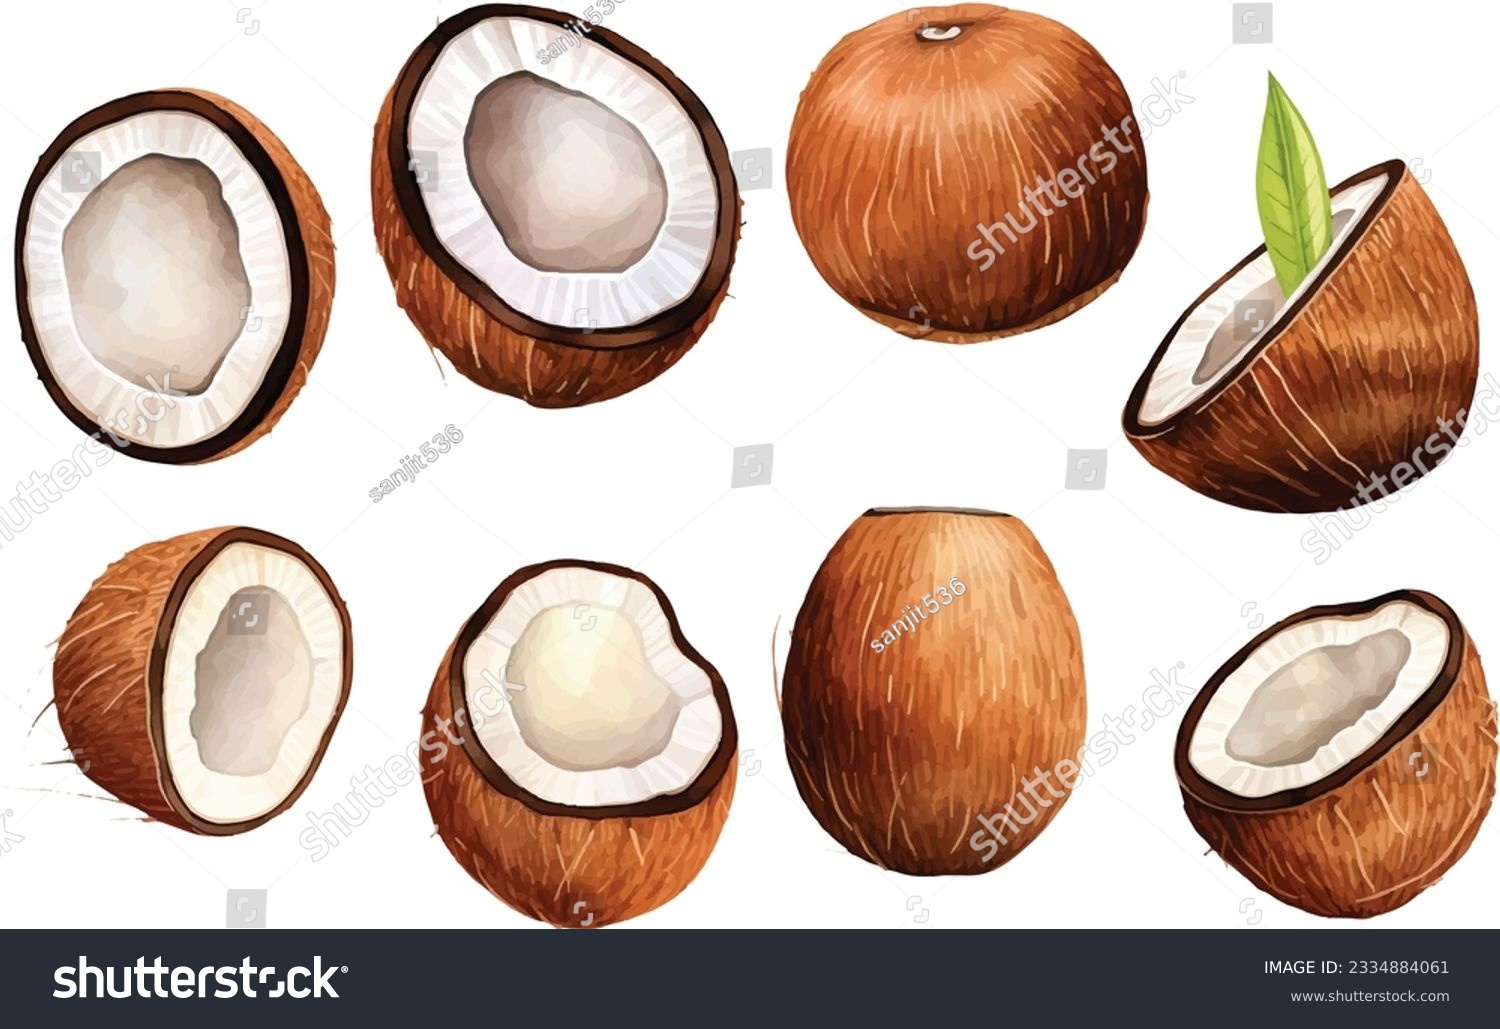 SVG of  Watercolor Fresh ripe coconut, coconut half piece with white flesh. Tropical coconut fruits on white background svg